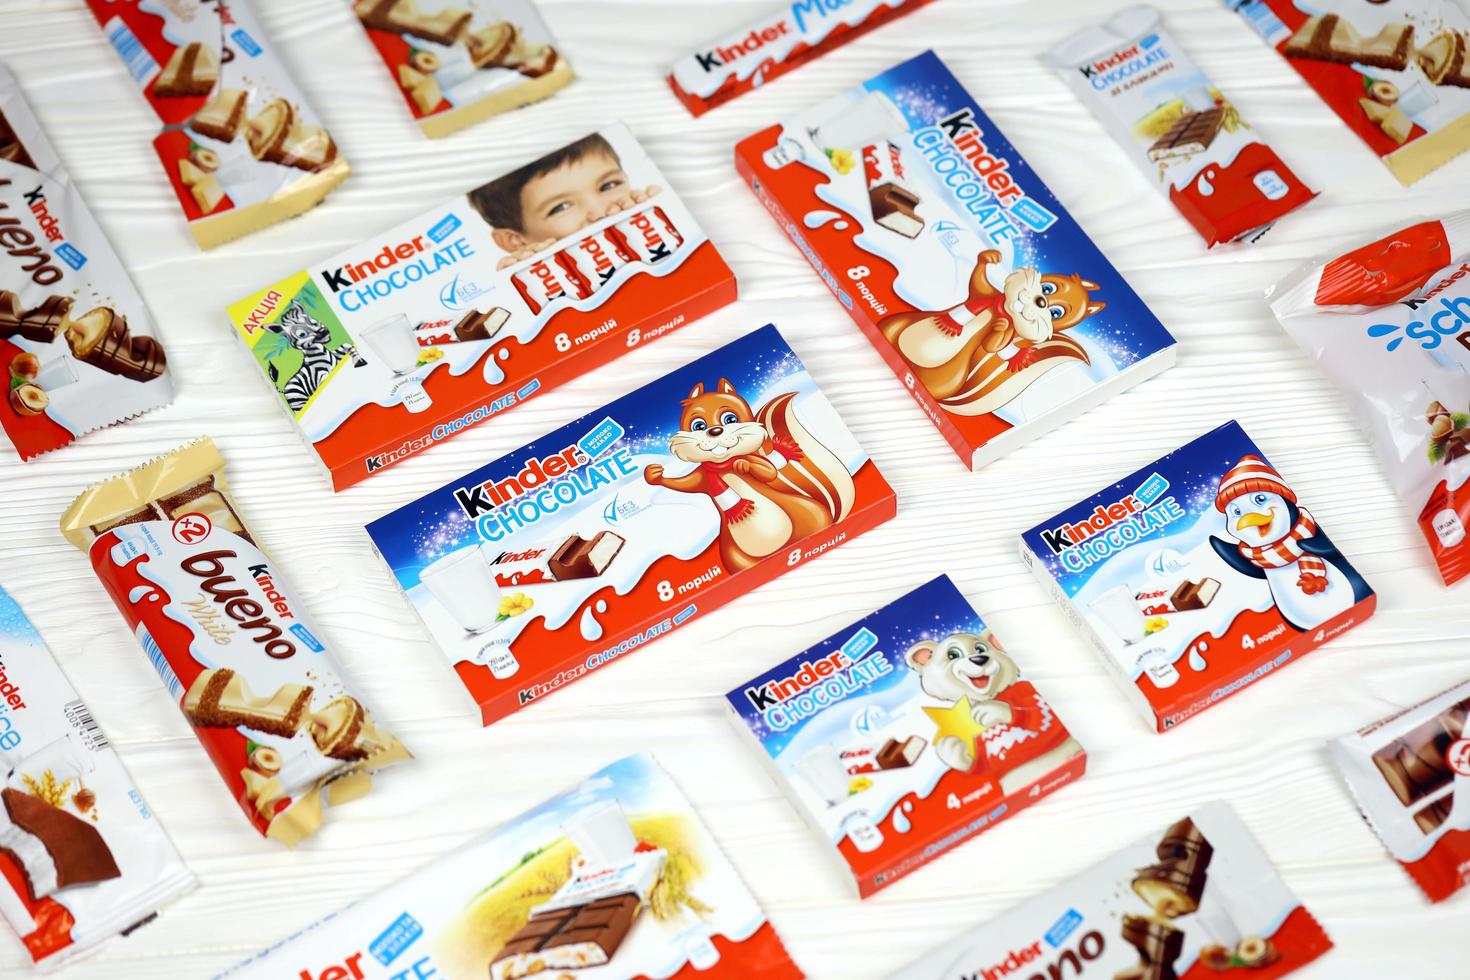 KHARKOV, UKRAINE - DECEMBER 8, 2020 Many different products by Kinder brand made by Ferrero SpA. Kinder is a confectionery product brand line of Italian manufacturer Ferrero photo